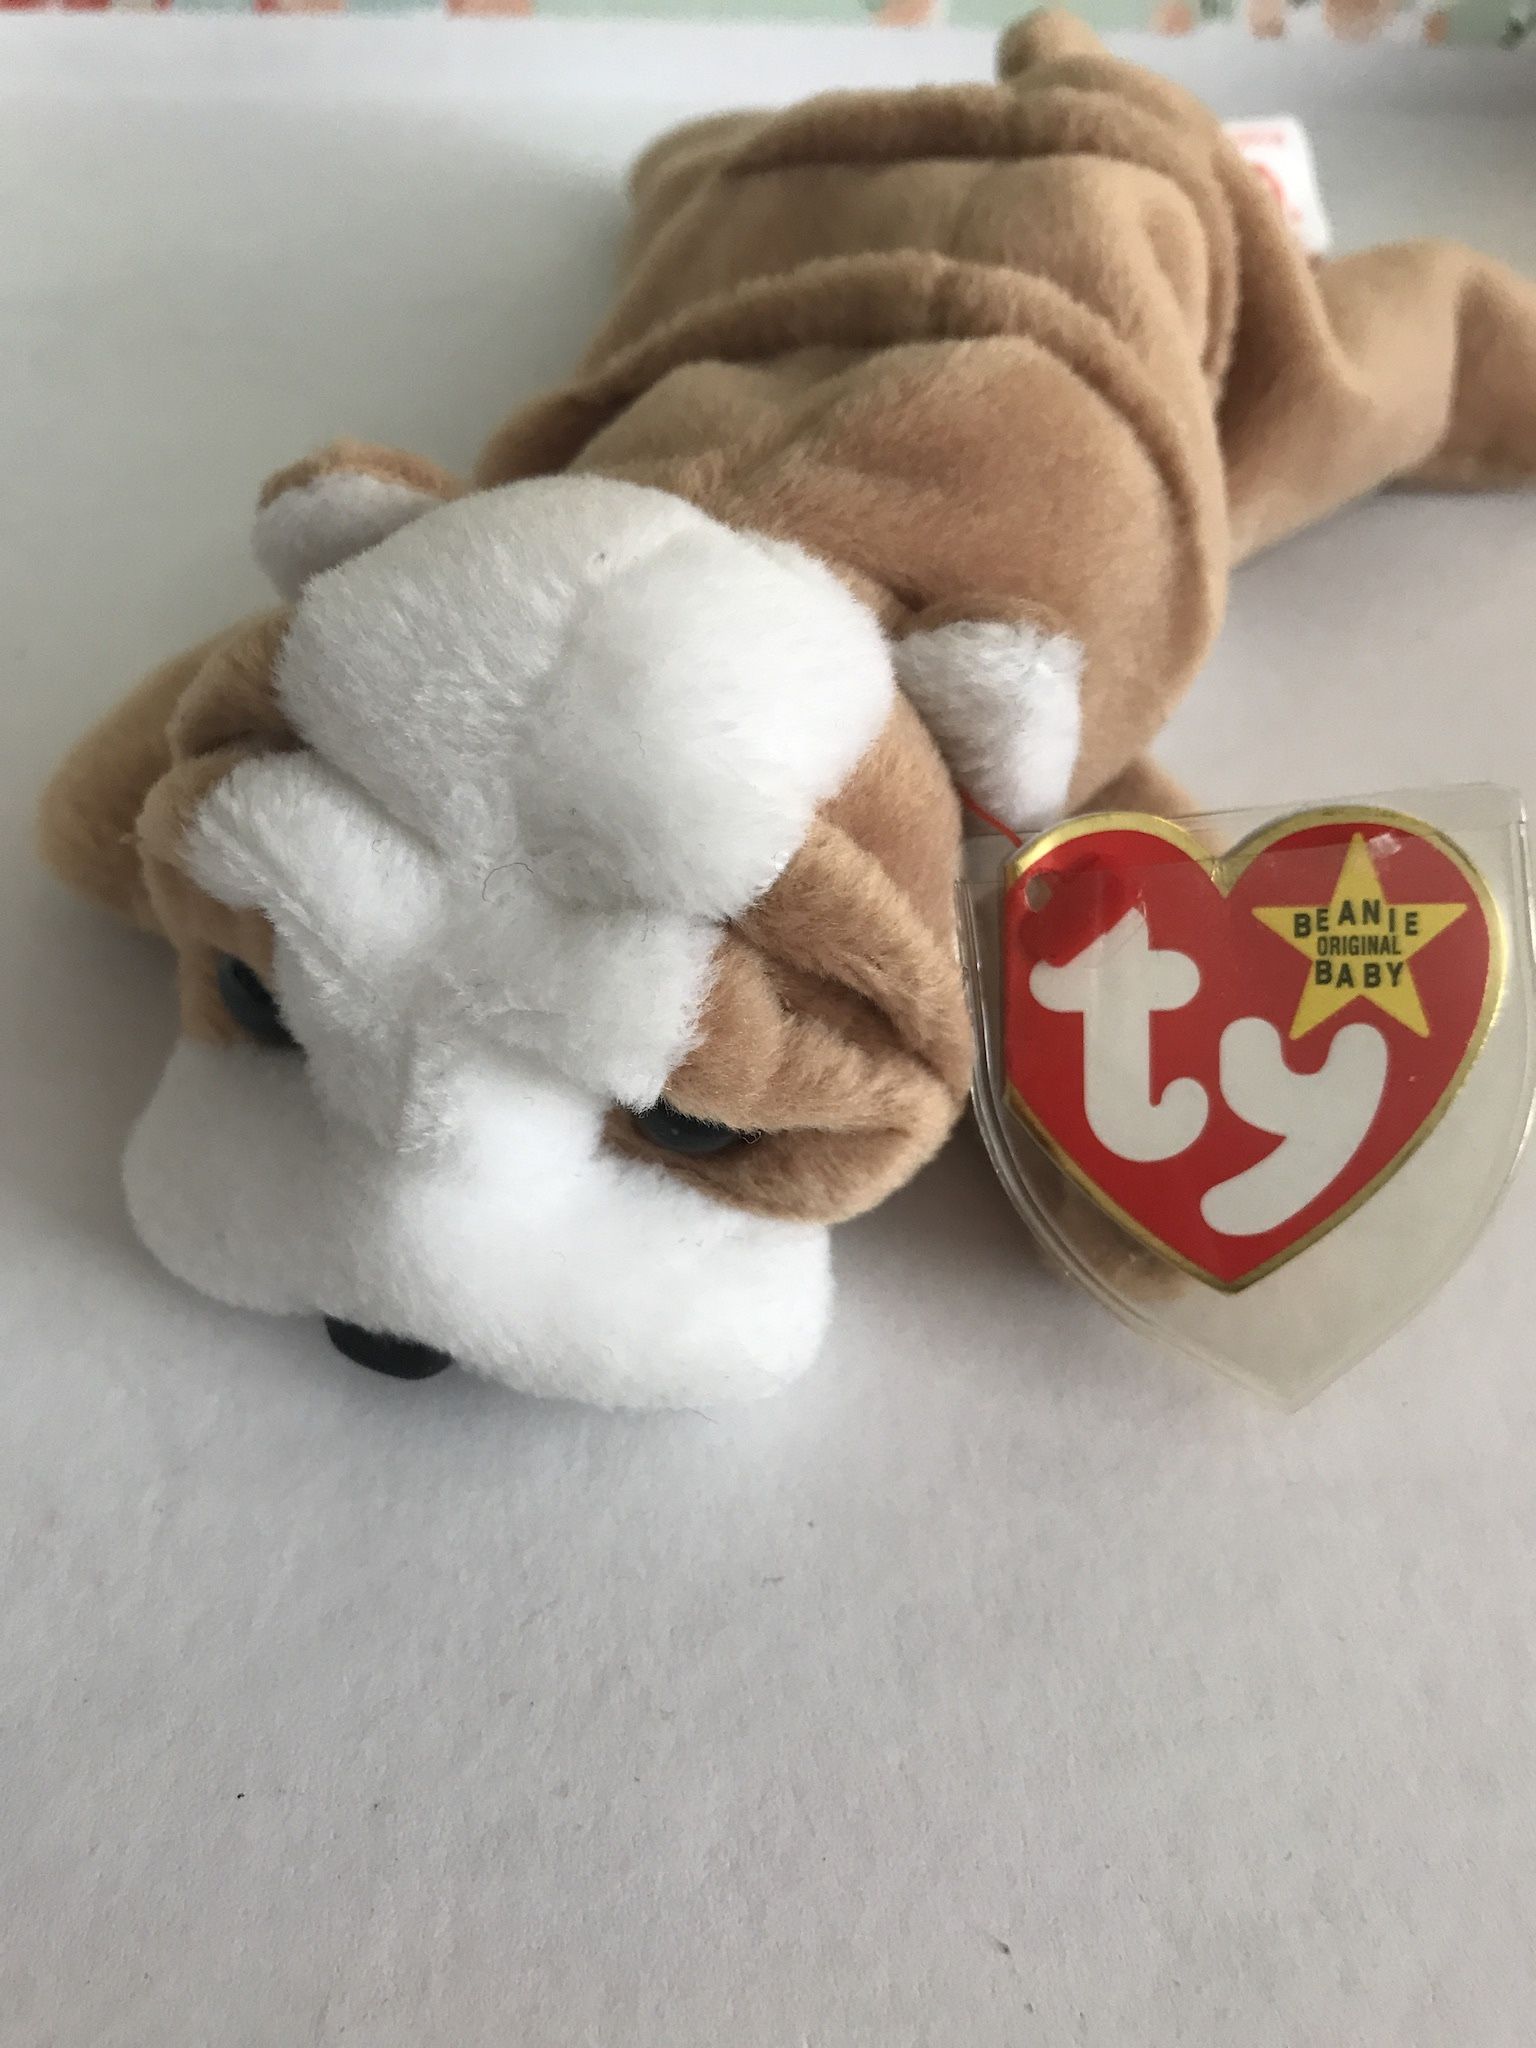 TY Beanie Baby Wrinkles 5-1-96. Style 4103. With Errors. P.V.C.